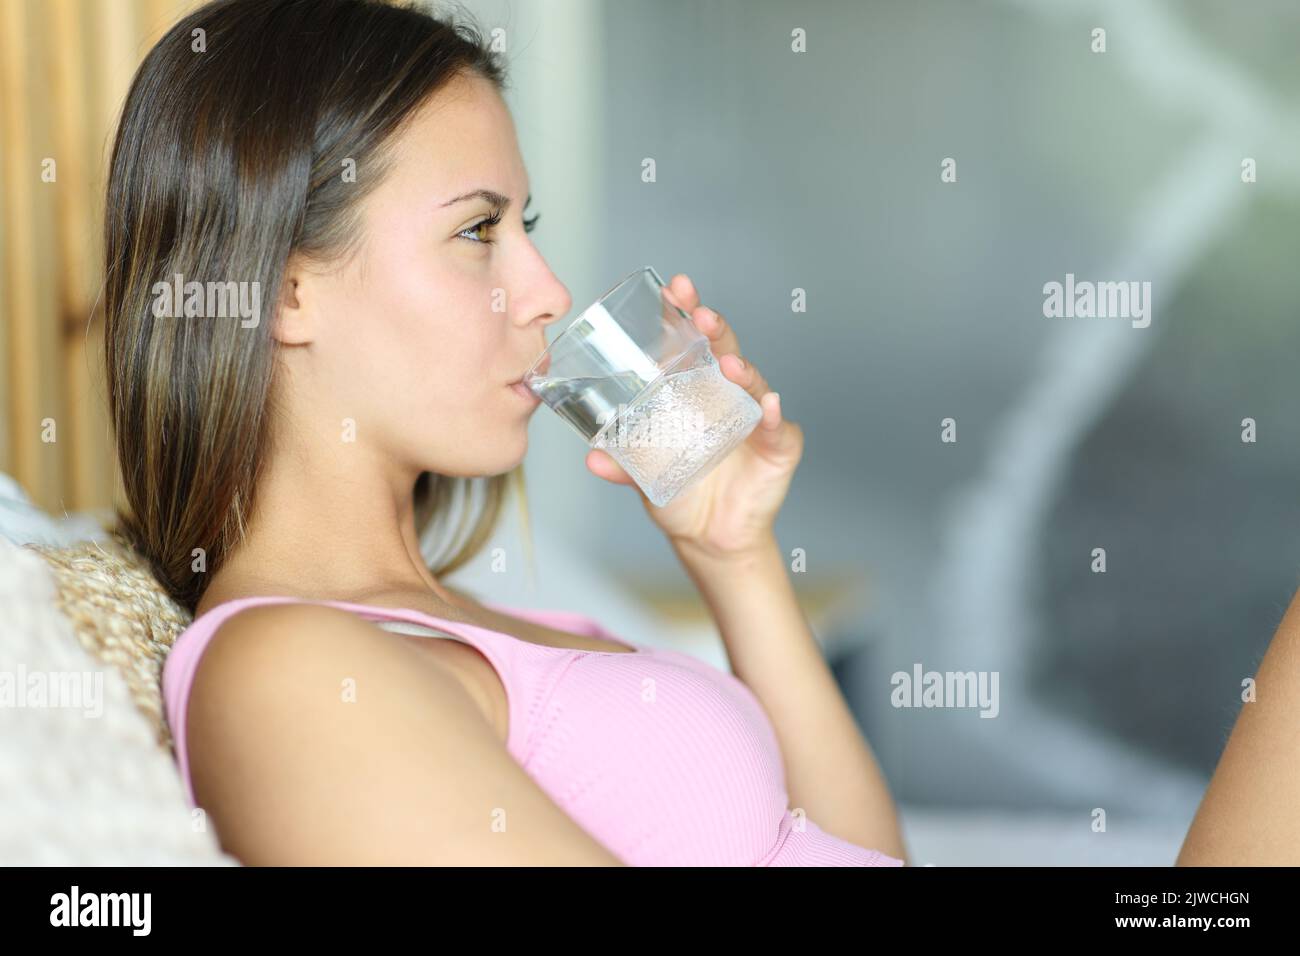 Side view portrait of a young woman drinking water on a bed at home Stock Photo